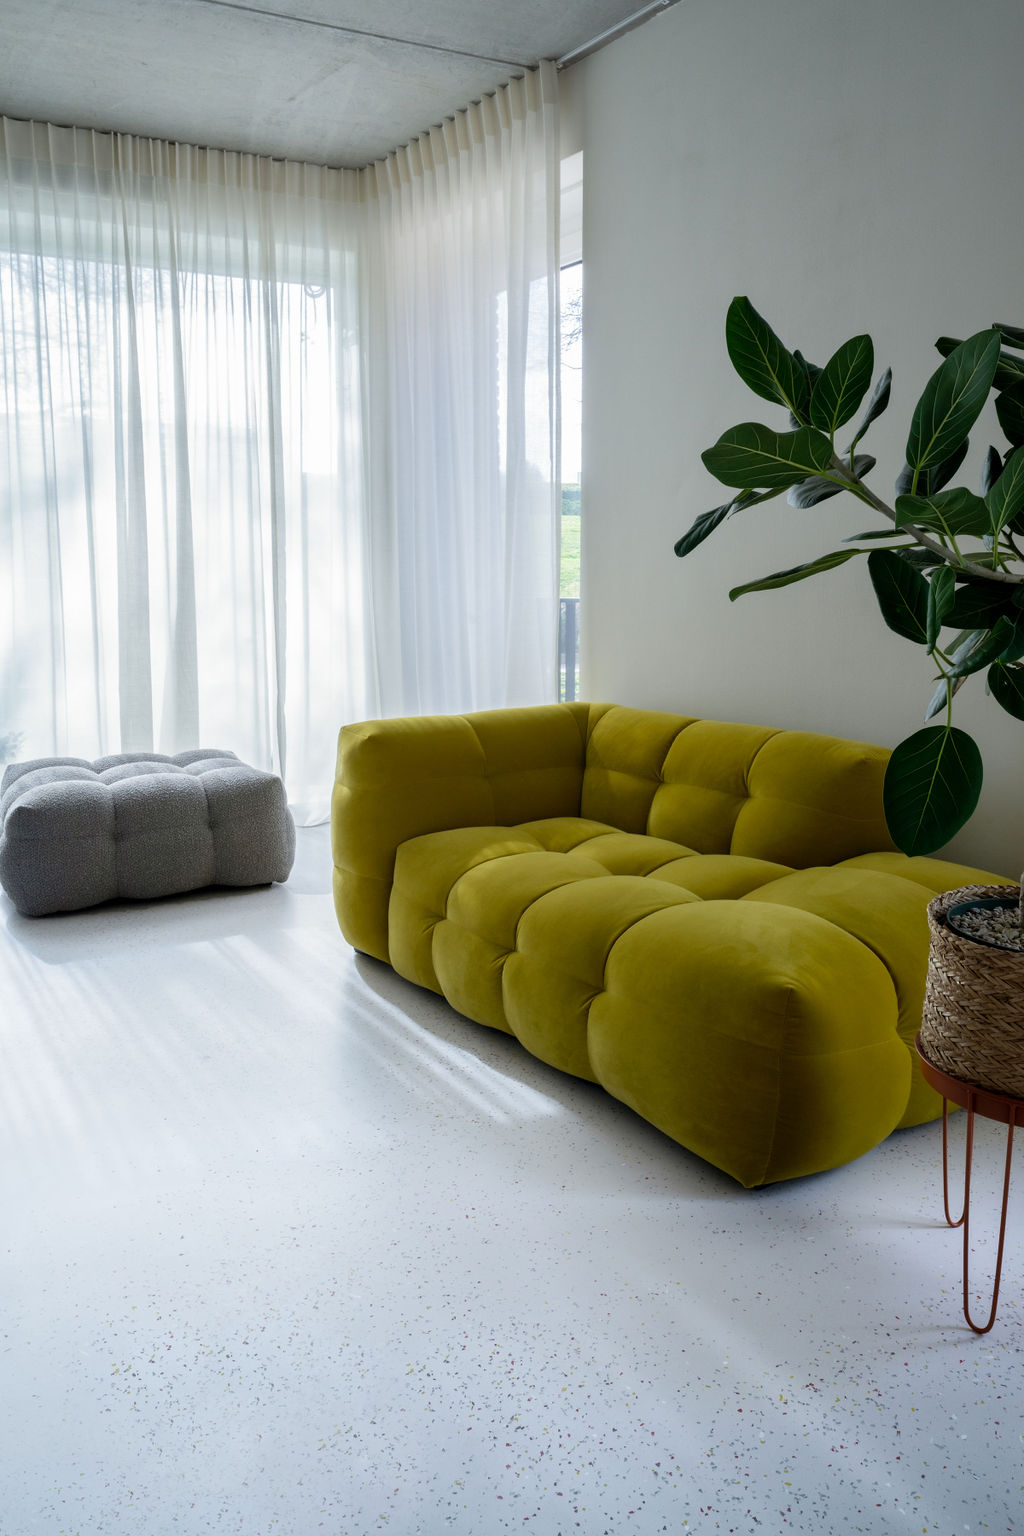 A yellow couch combined with The Good Floors mix flooring concept